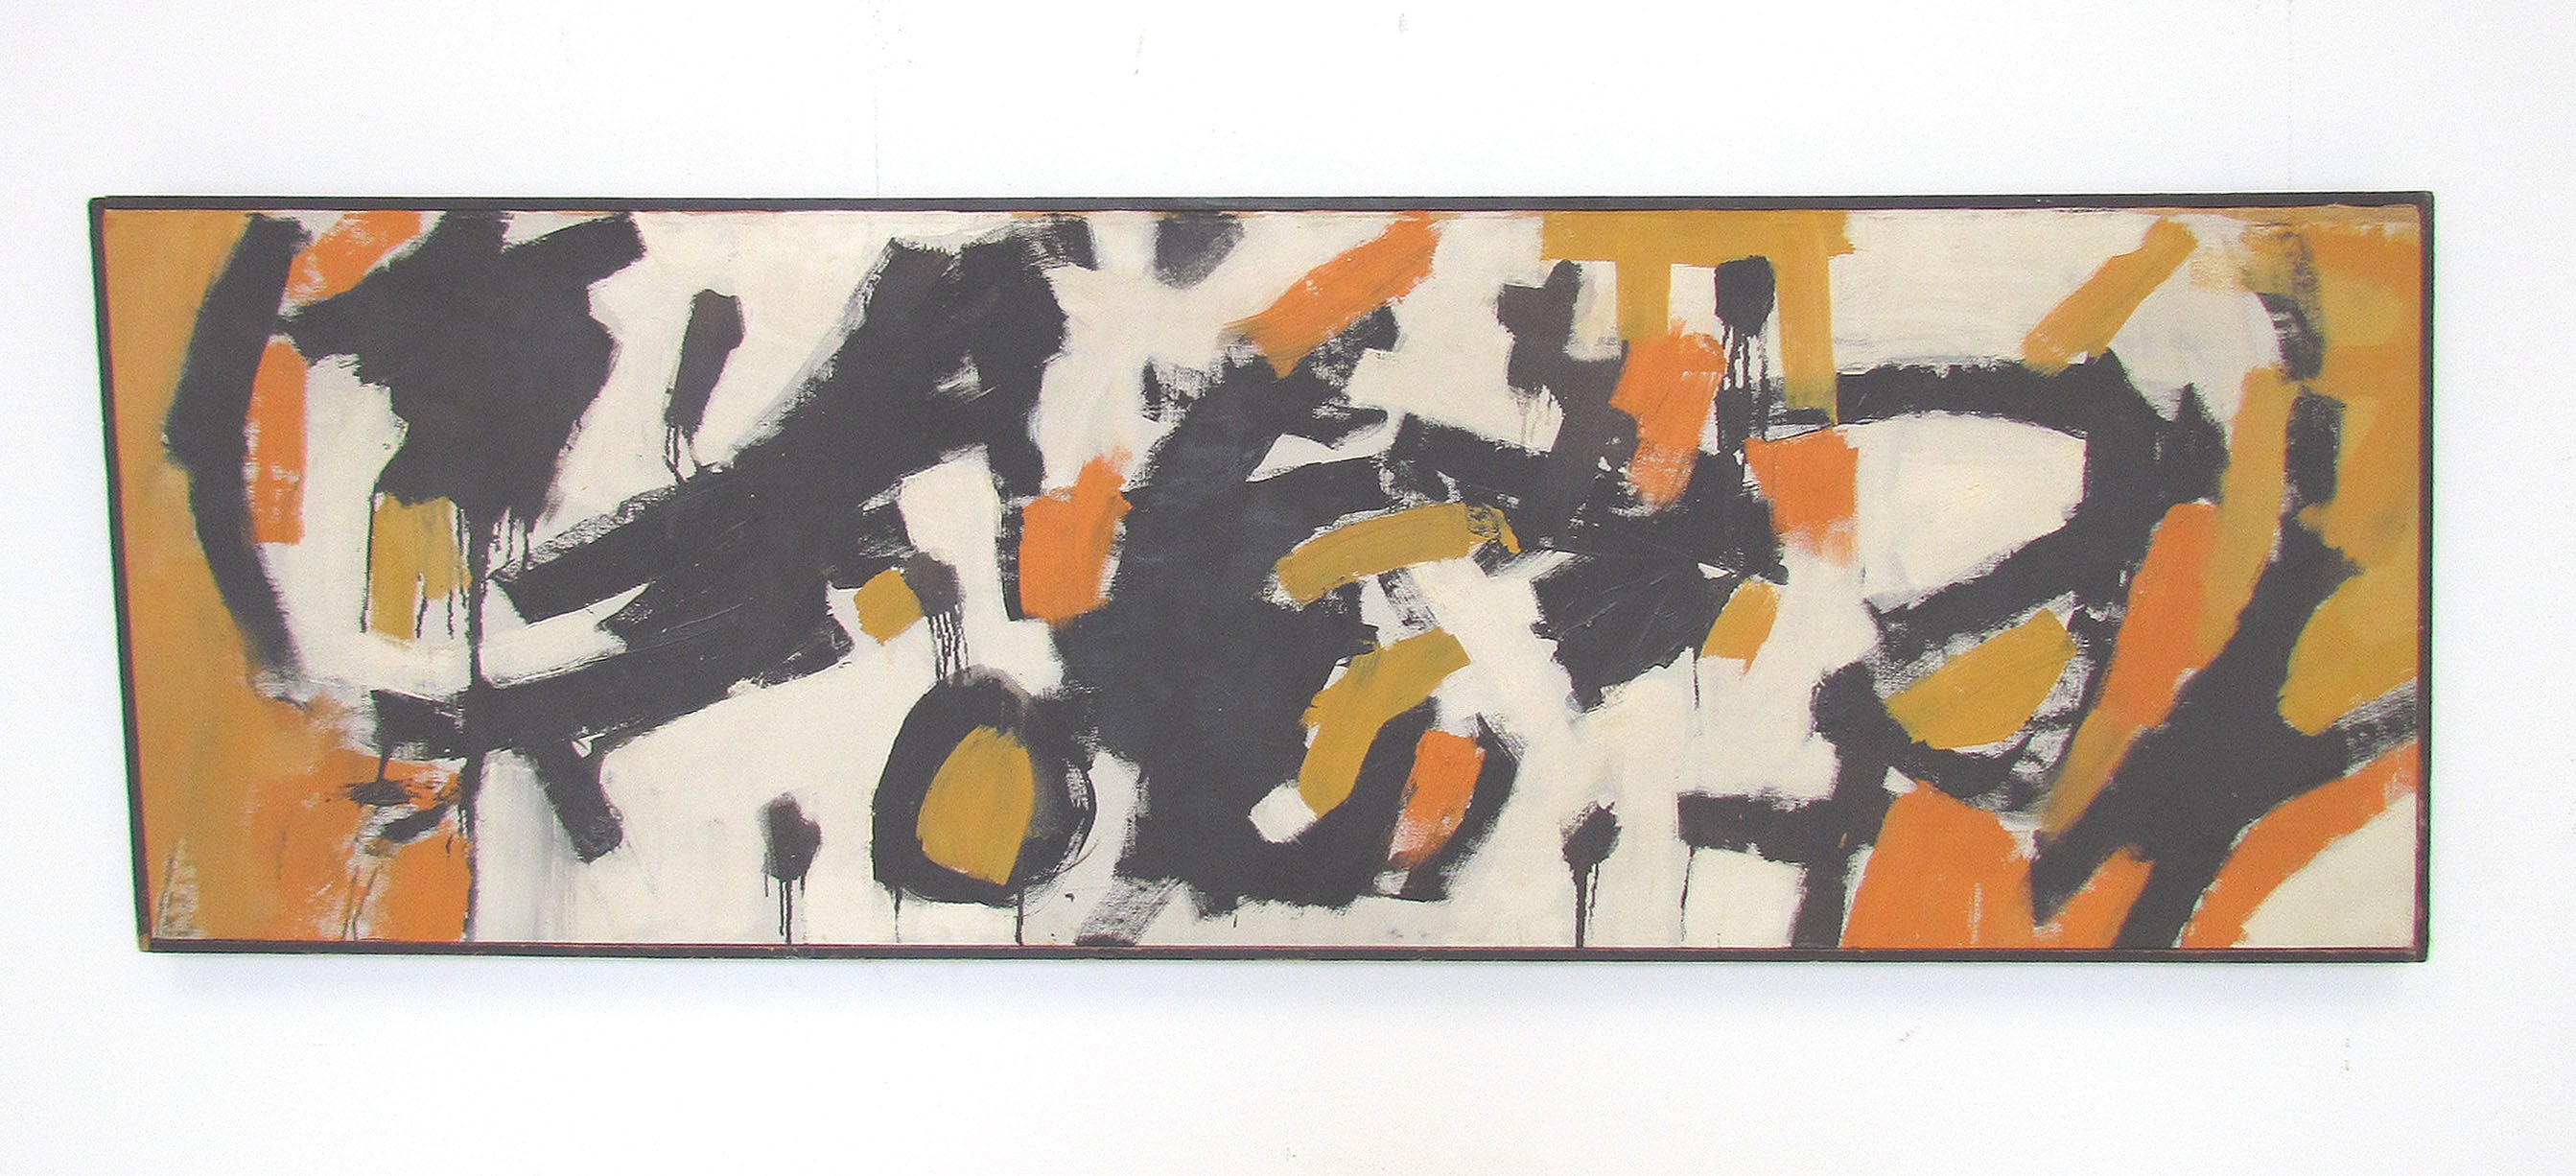 Panoramic Abstract Expressionist Painting in the Manner of Franz Kline ca. 1960s